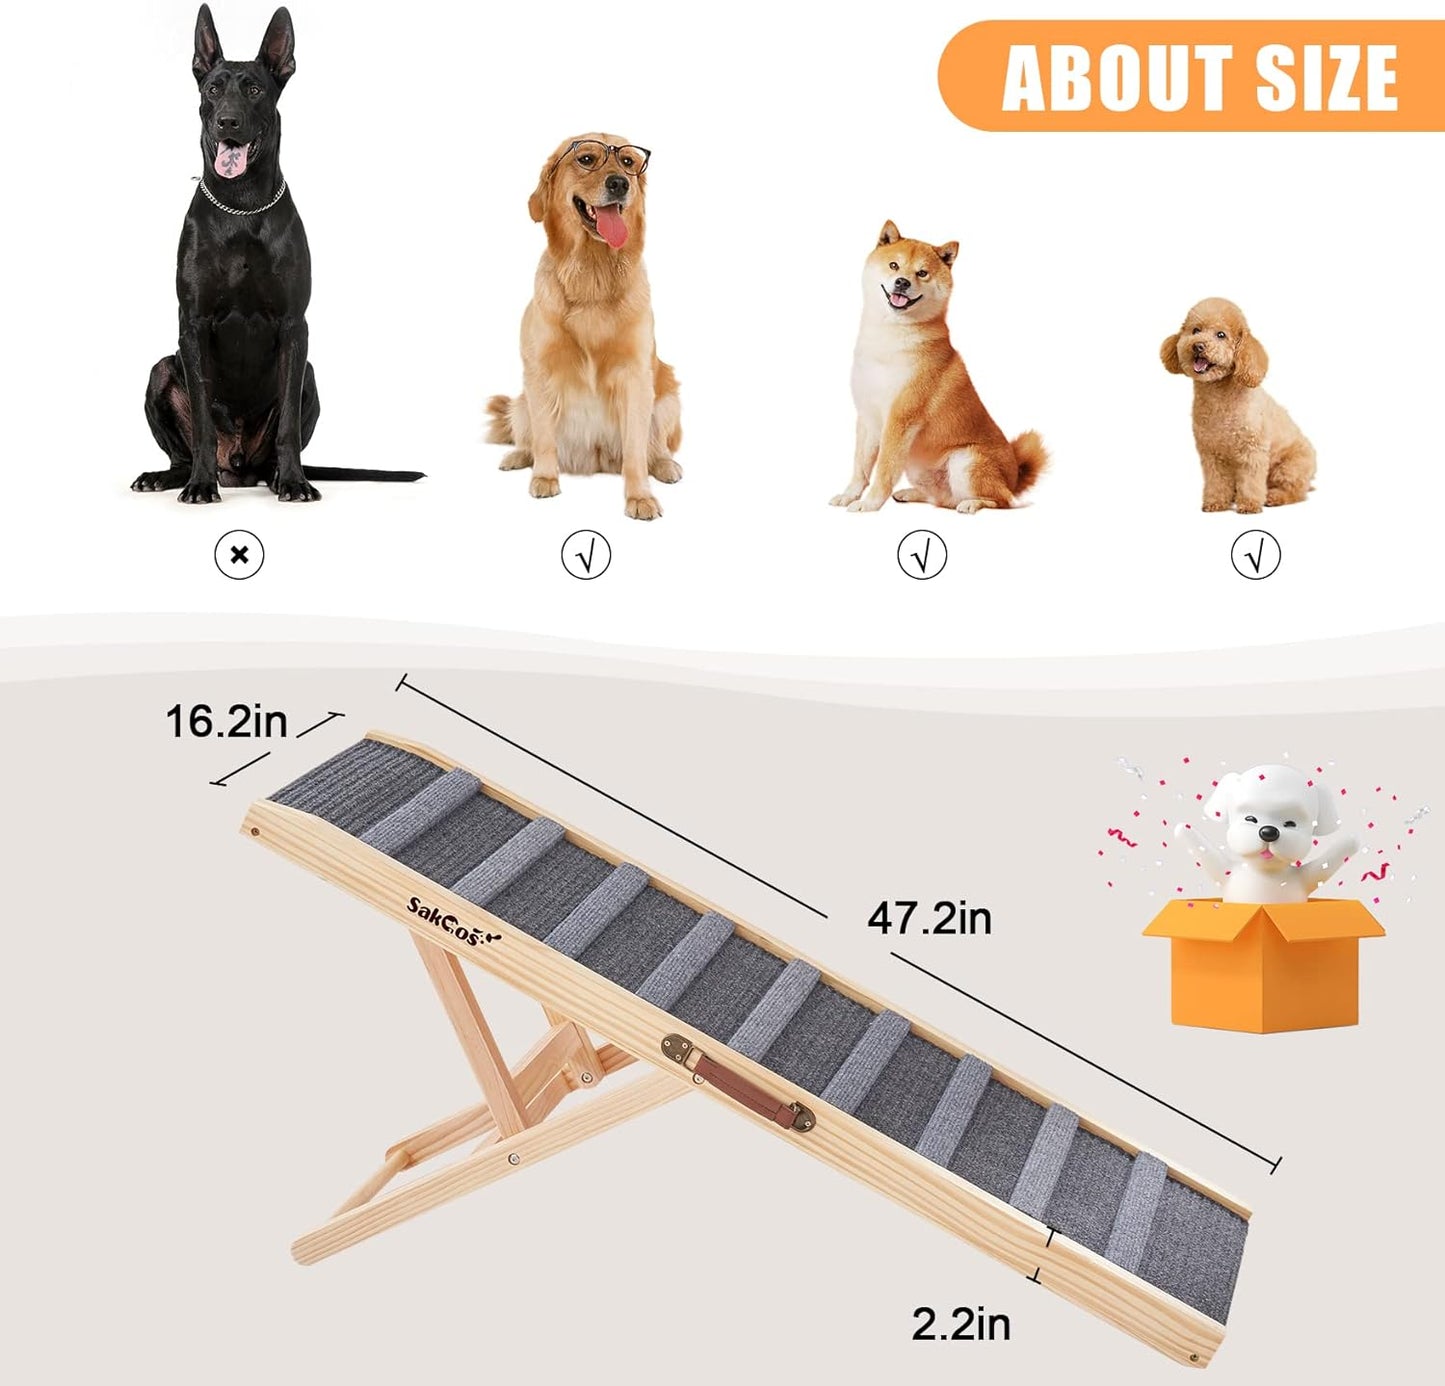 Sakgos Dog Ramp for Bed Wooden Dog Ramps for High Beds Adjustable Dog Ramp for Car Portable Pet Ramps for Large Dogs Get on Bed and Couch Folding Dog Bed Ramp, Non-Slip Carpet Surface 5 Levels,250lbs